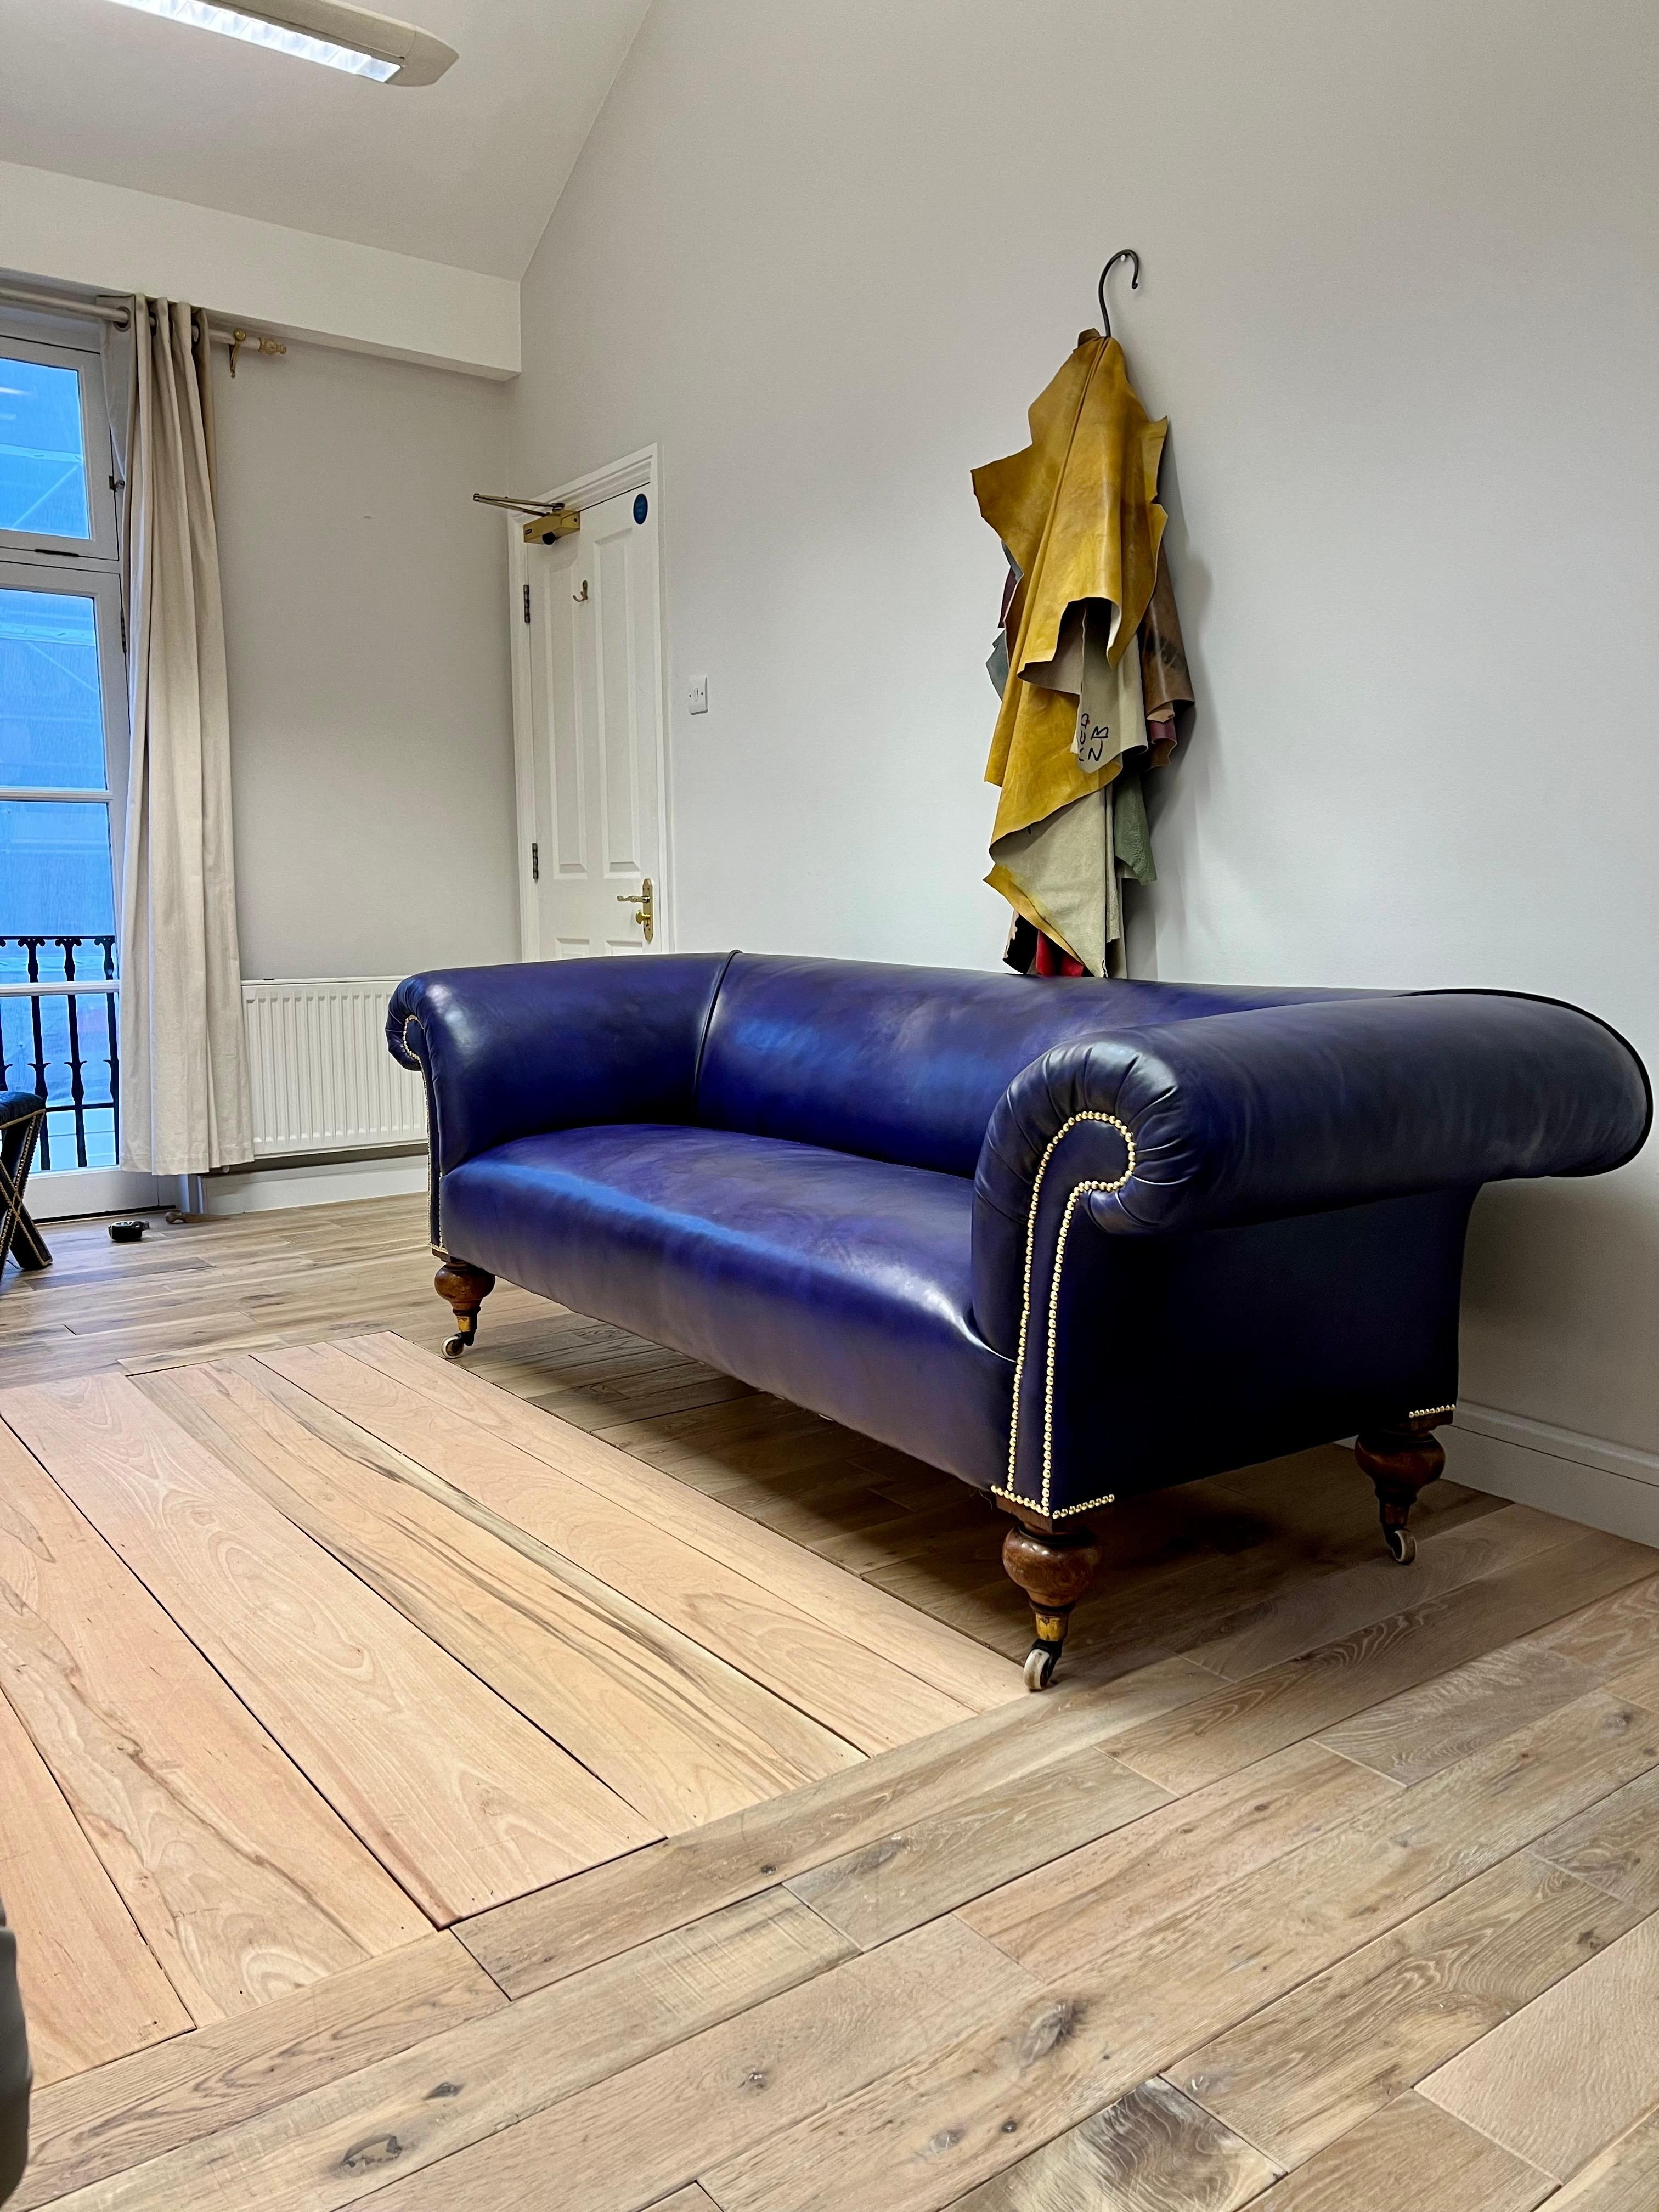 As a LAPADA dealer and furniture maker, I always have a large stock of Chesterfield sofas and chairs ranging from early 19thC through to present day. We also craft our own Signature Collection in-house.

This particular piece is attributed to